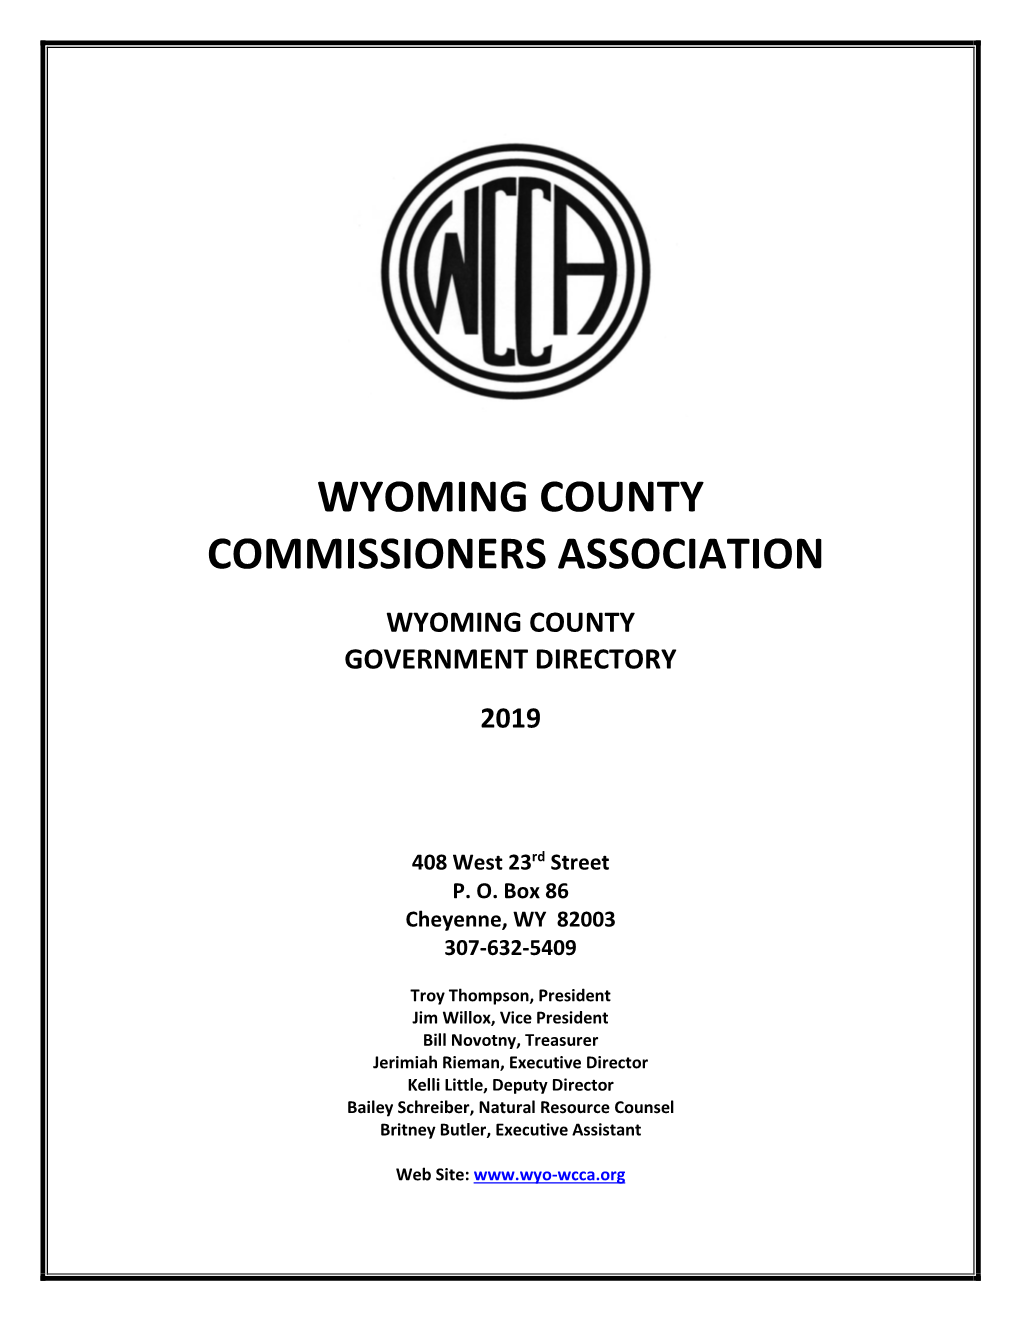 Wyoming County Commissioners Association